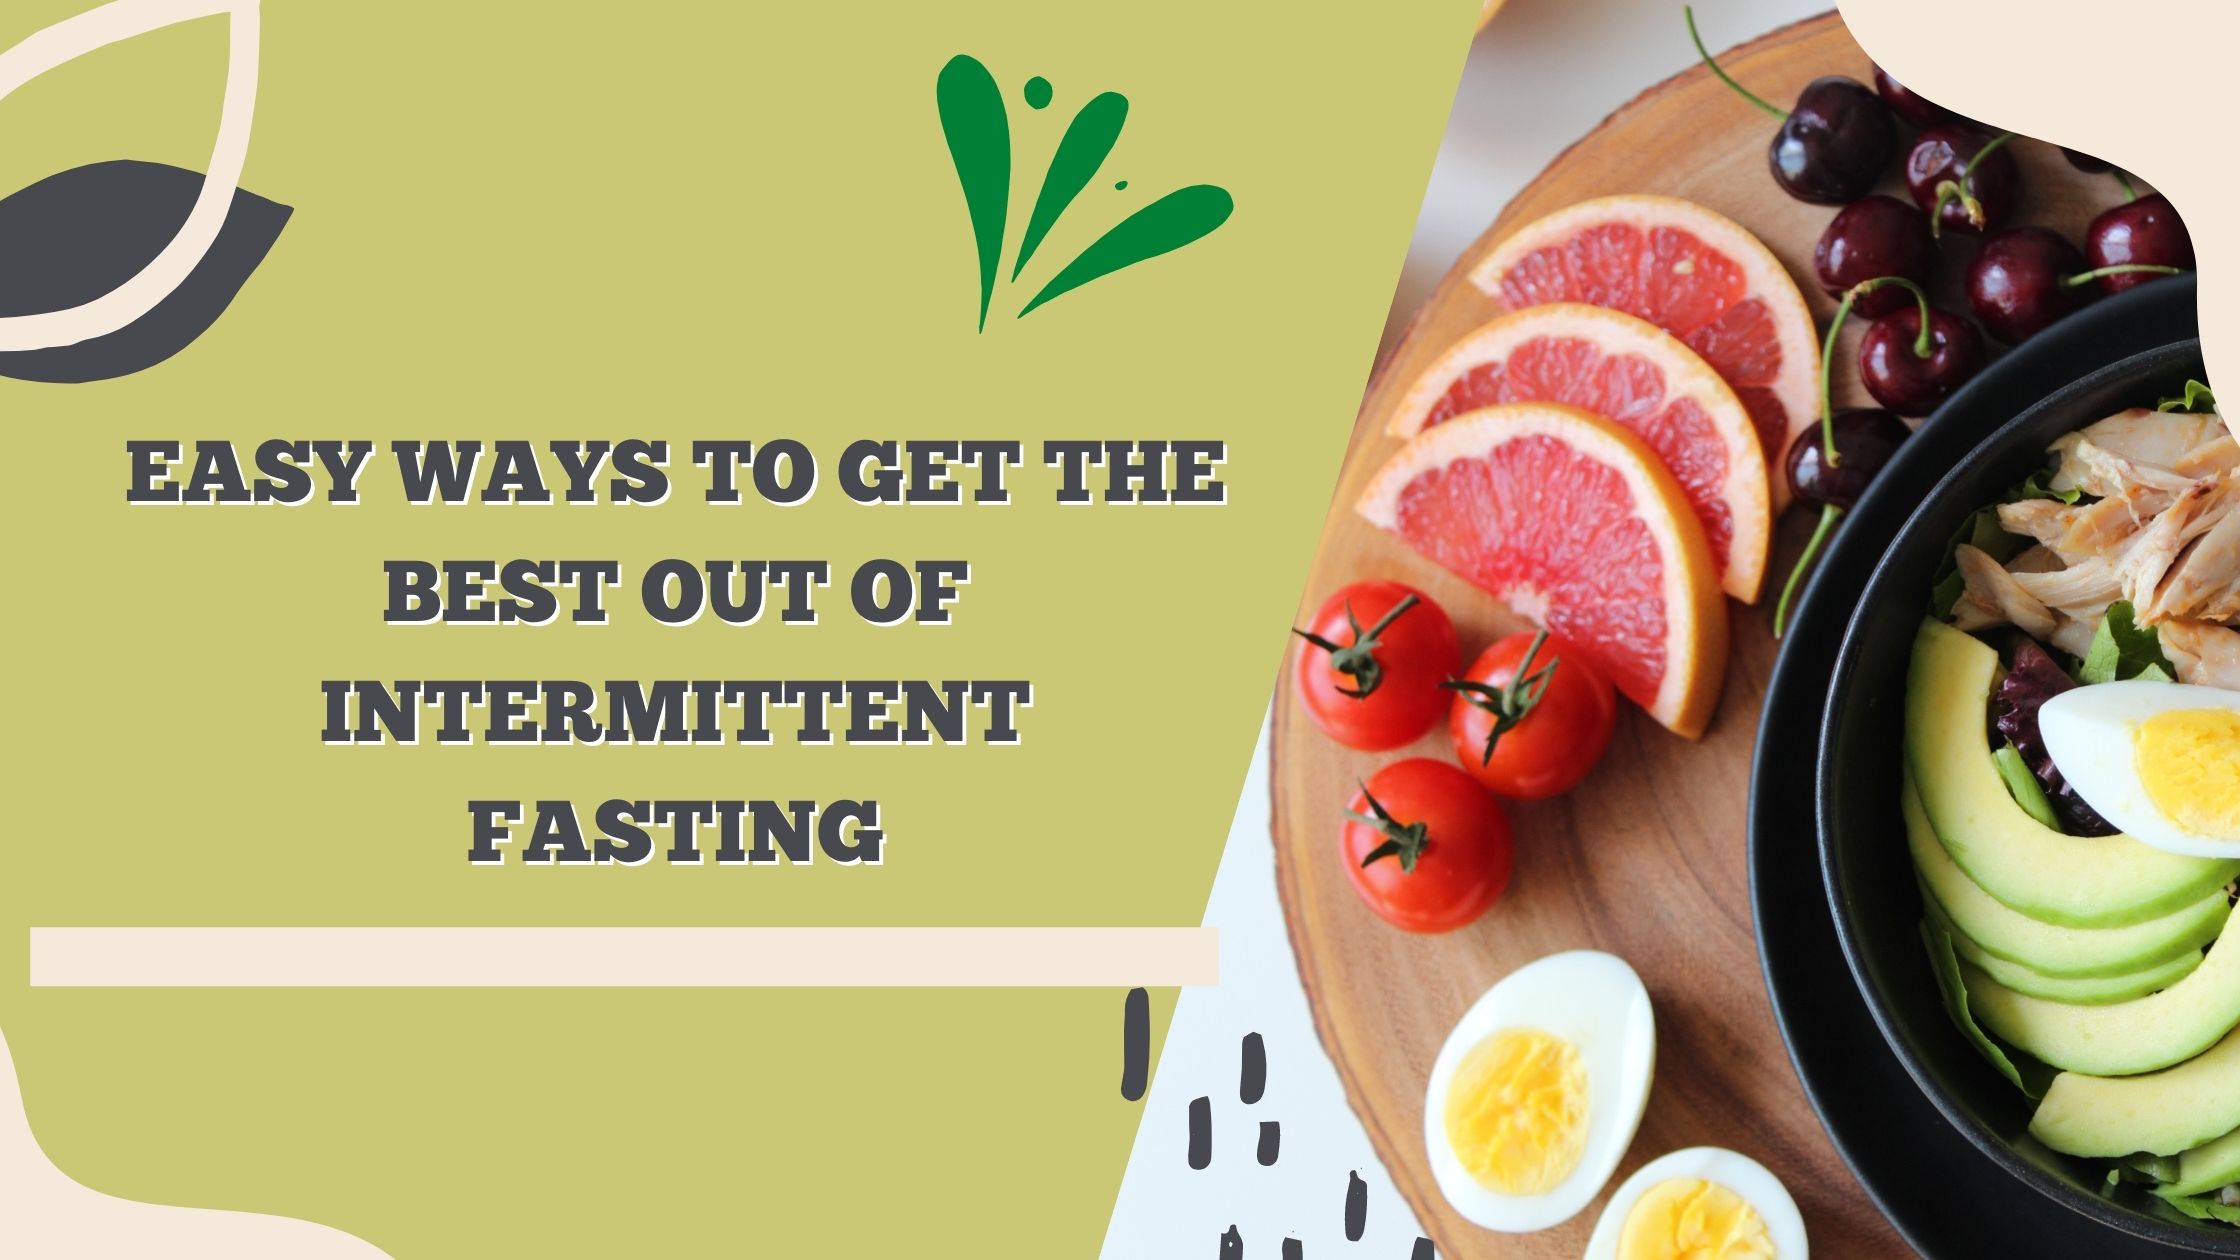 Easy ways to get the best out of intermittent fasting